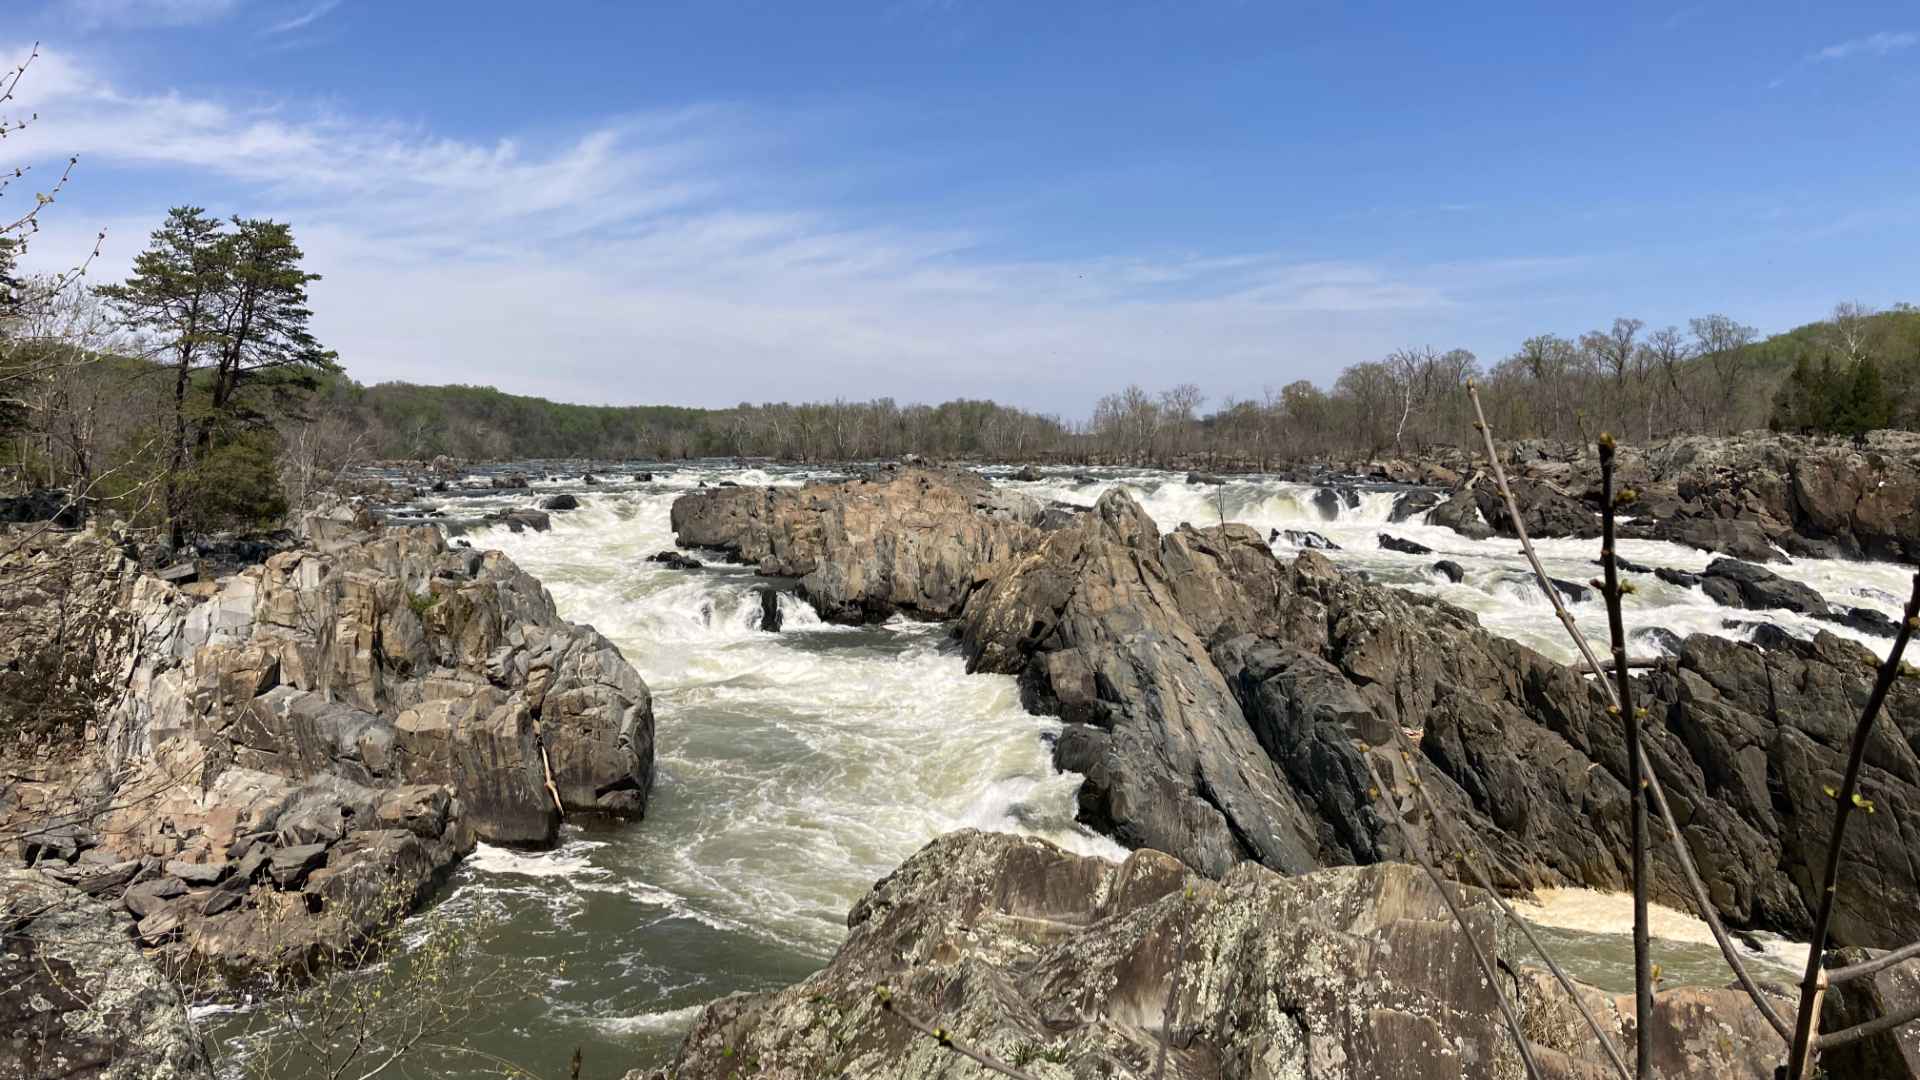 Encouraging healthy habits, Jenni took her parents on a hike through Great Falls Park, Virginia.